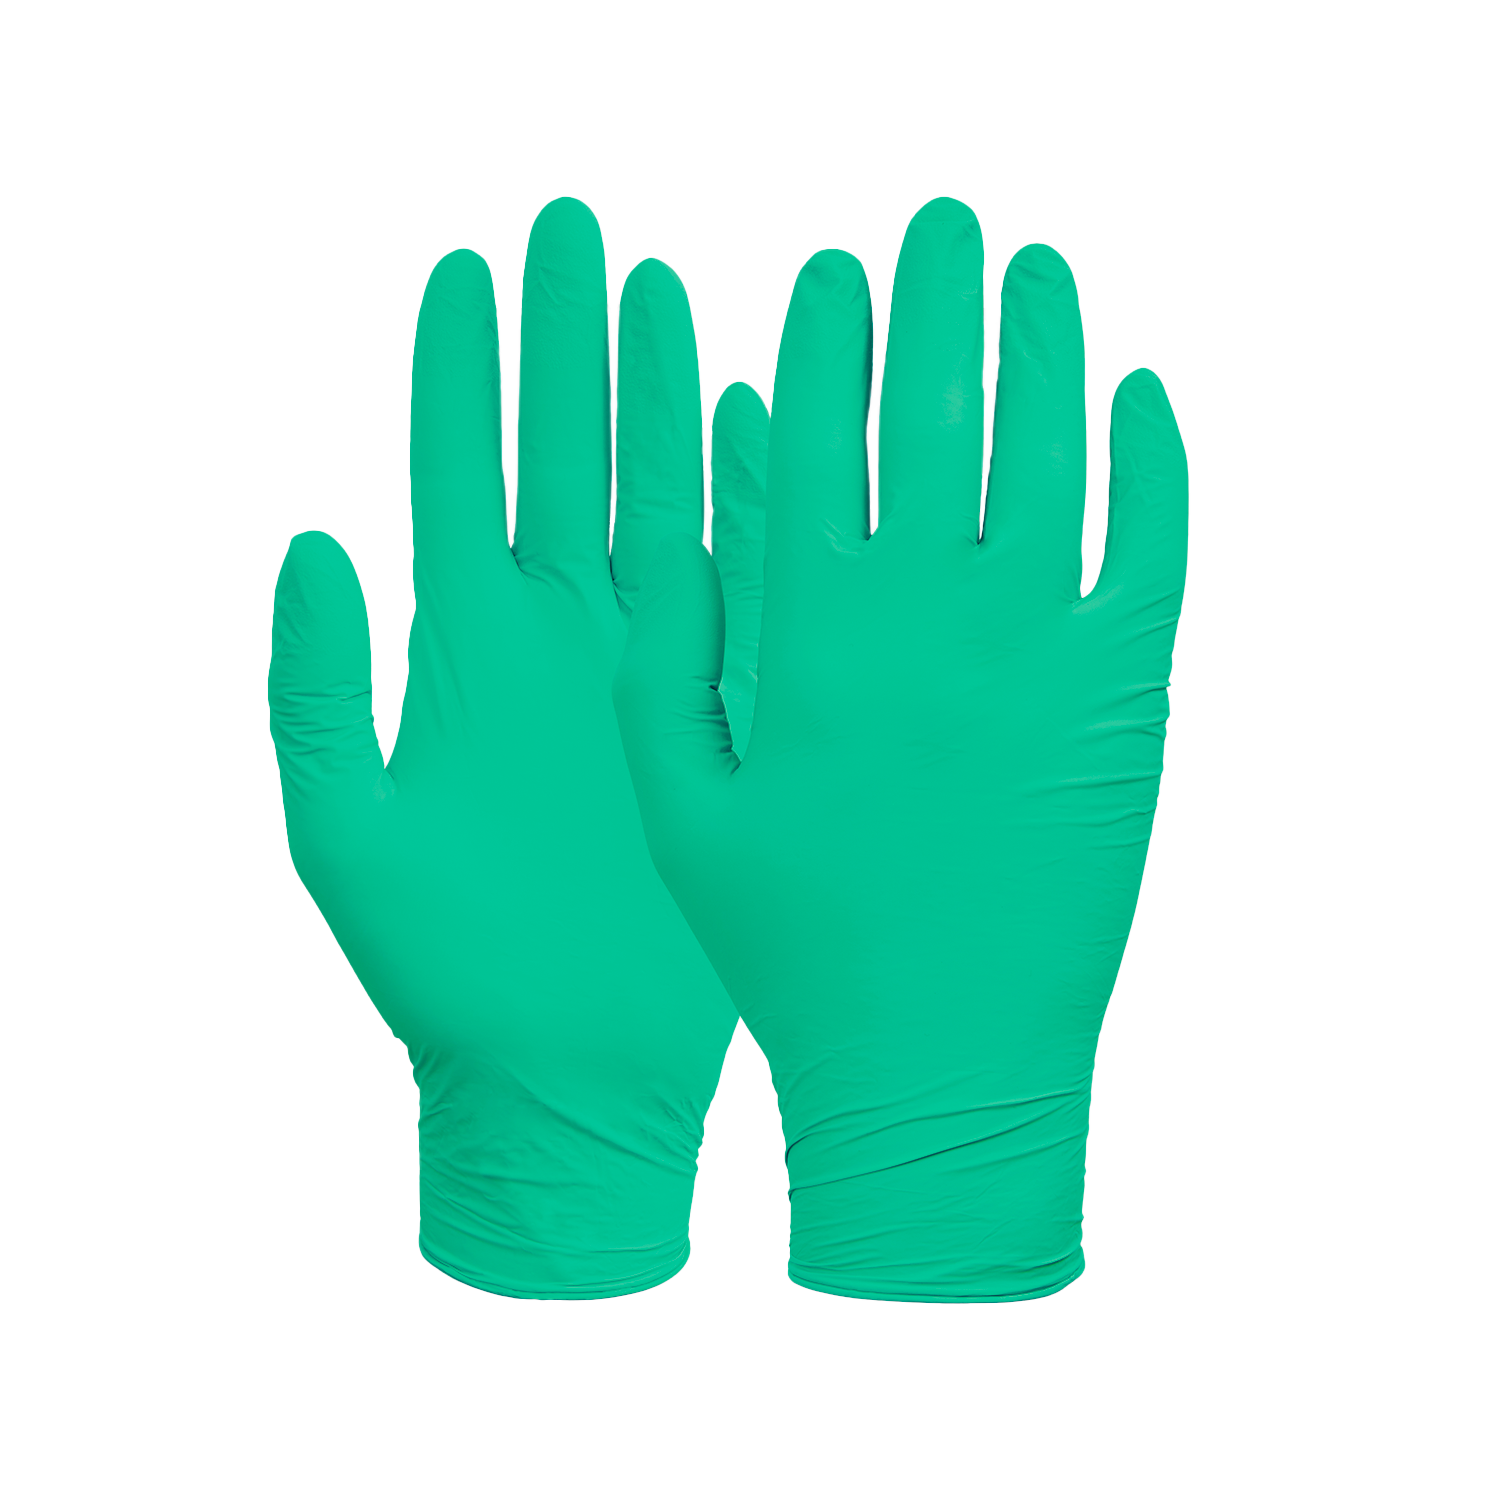 NORSE Disposable Green Green disposable nitrile gloves - size 7/S